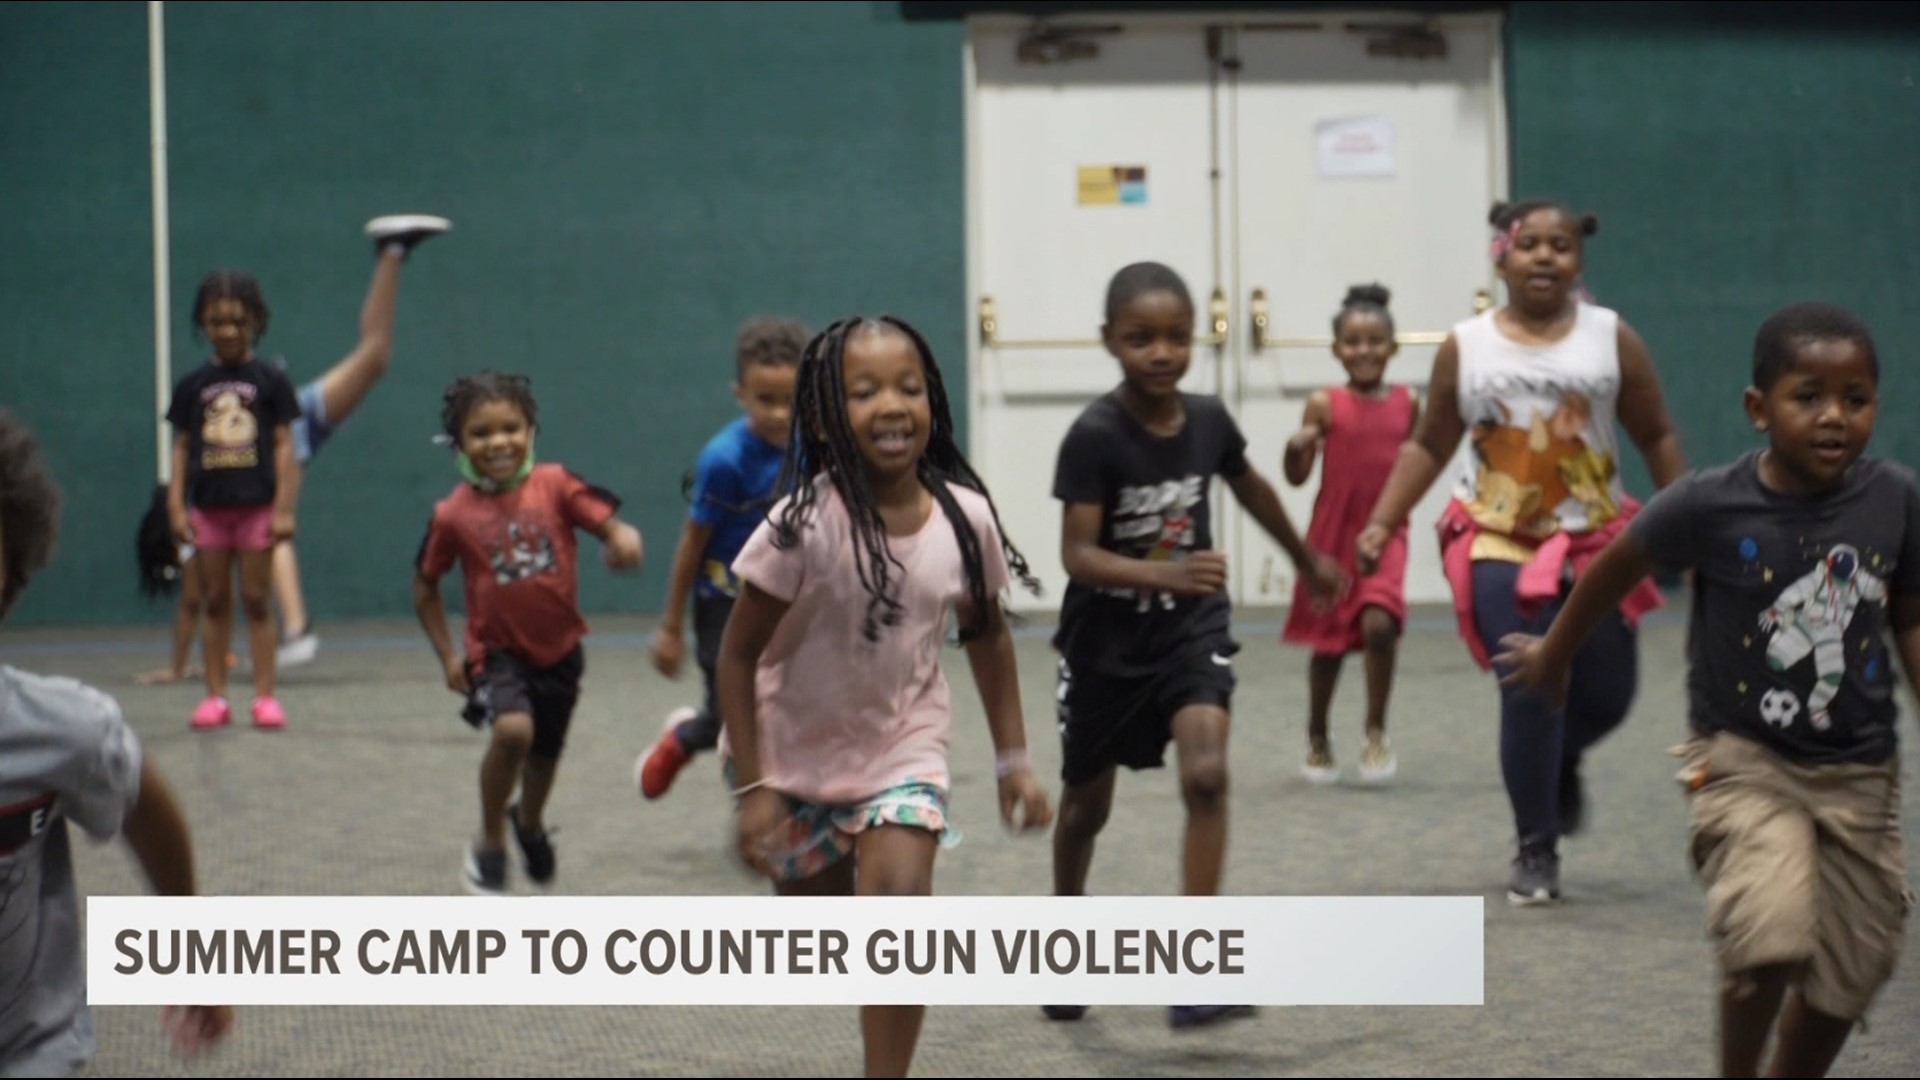 Highland Christian Center wants to build up kids from the Portland neighborhoods hit hardest by gun violence. Staff say it all begins with mentorship.